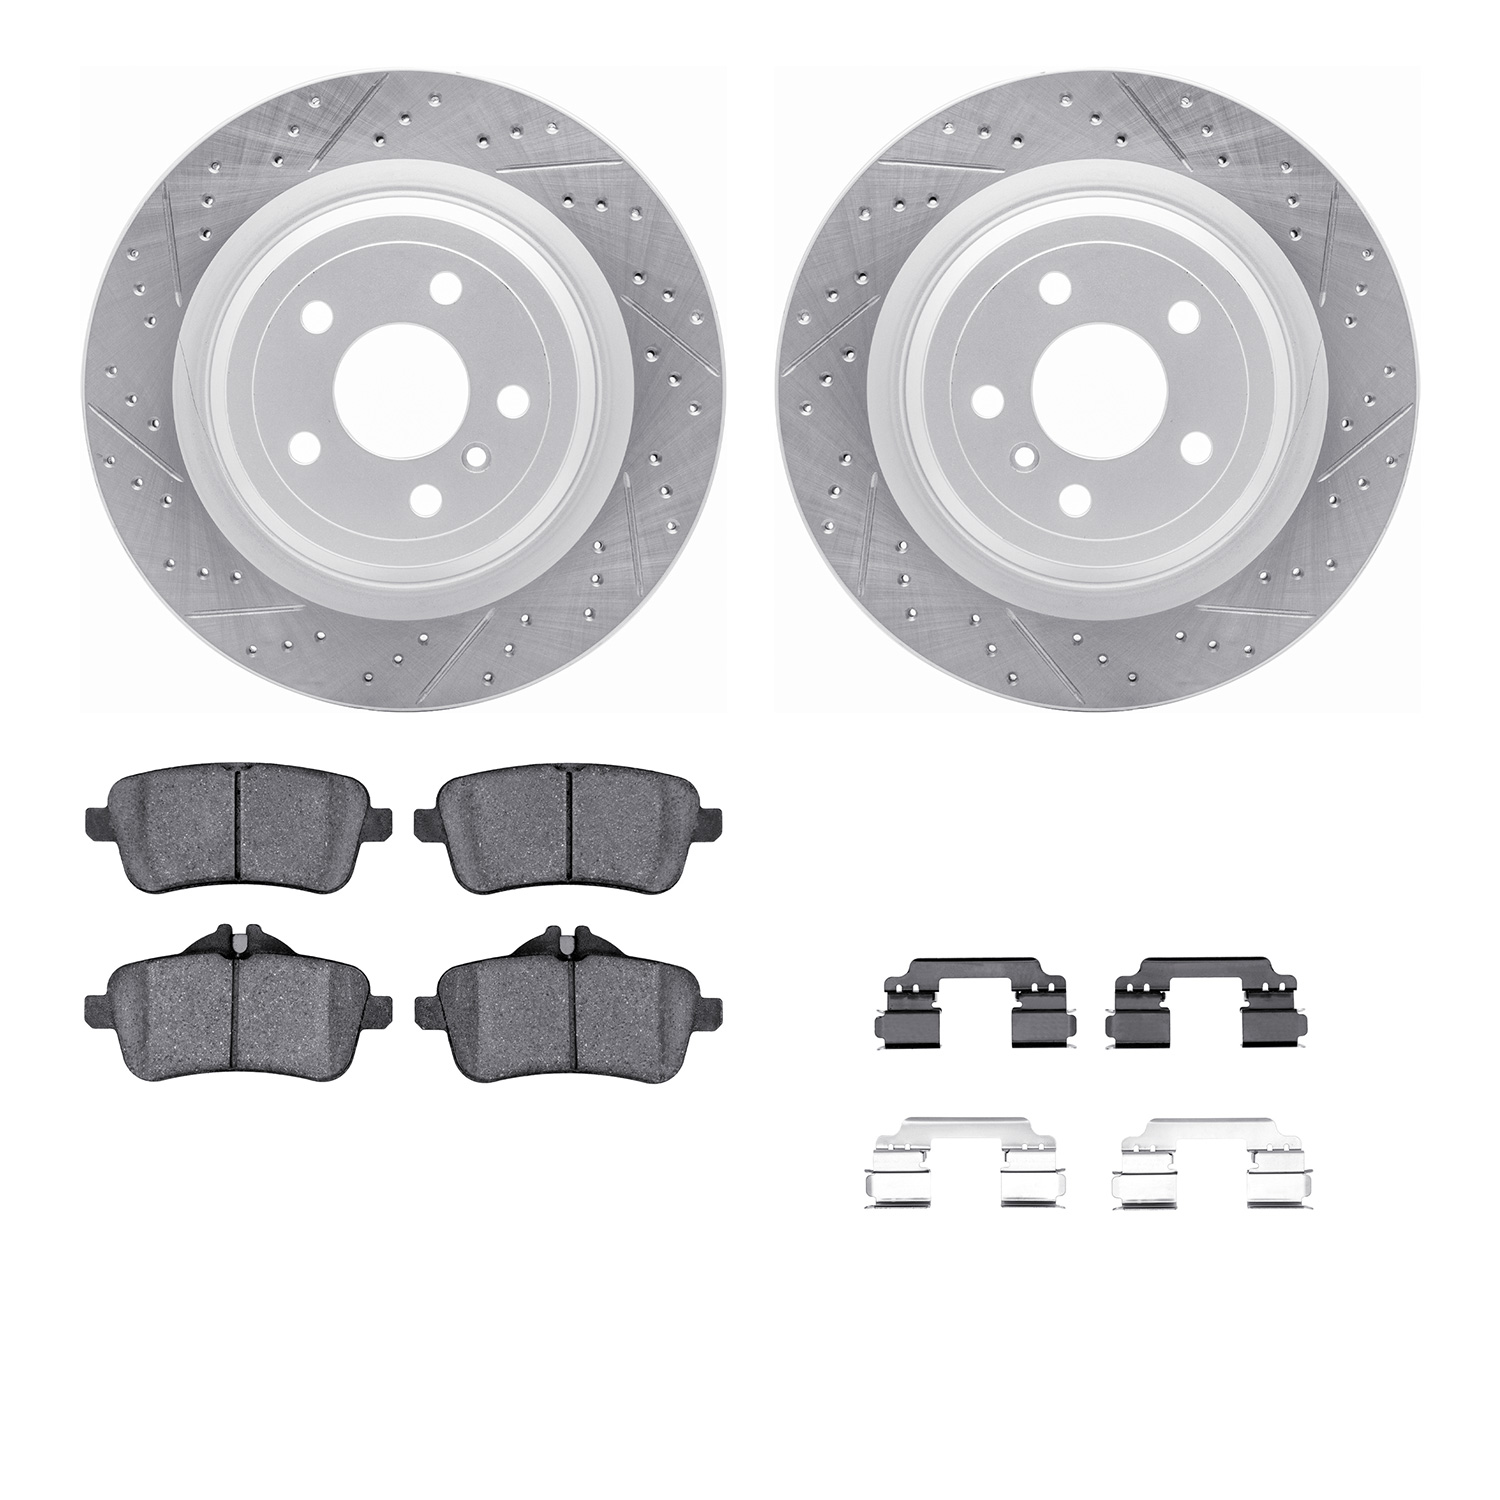 2512-63261 Geoperformance Drilled/Slotted Rotors w/5000 Advanced Brake Pads Kit & Hardware, 2012-2019 Mercedes-Benz, Position: R